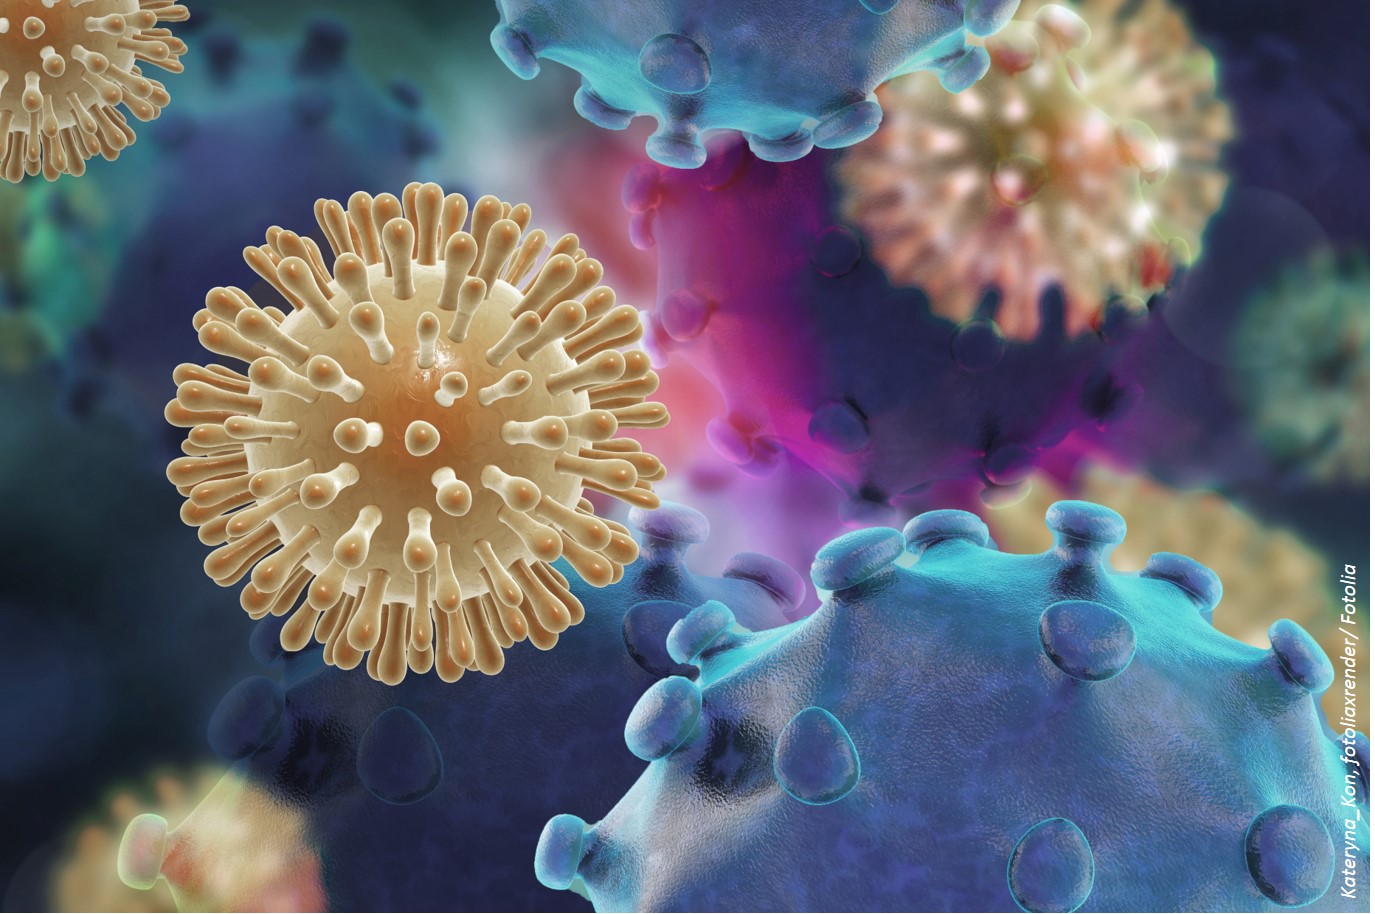 Treating HCV in HIV-Coinfection: Still a Therapeutic Dilemma?1375 x 914